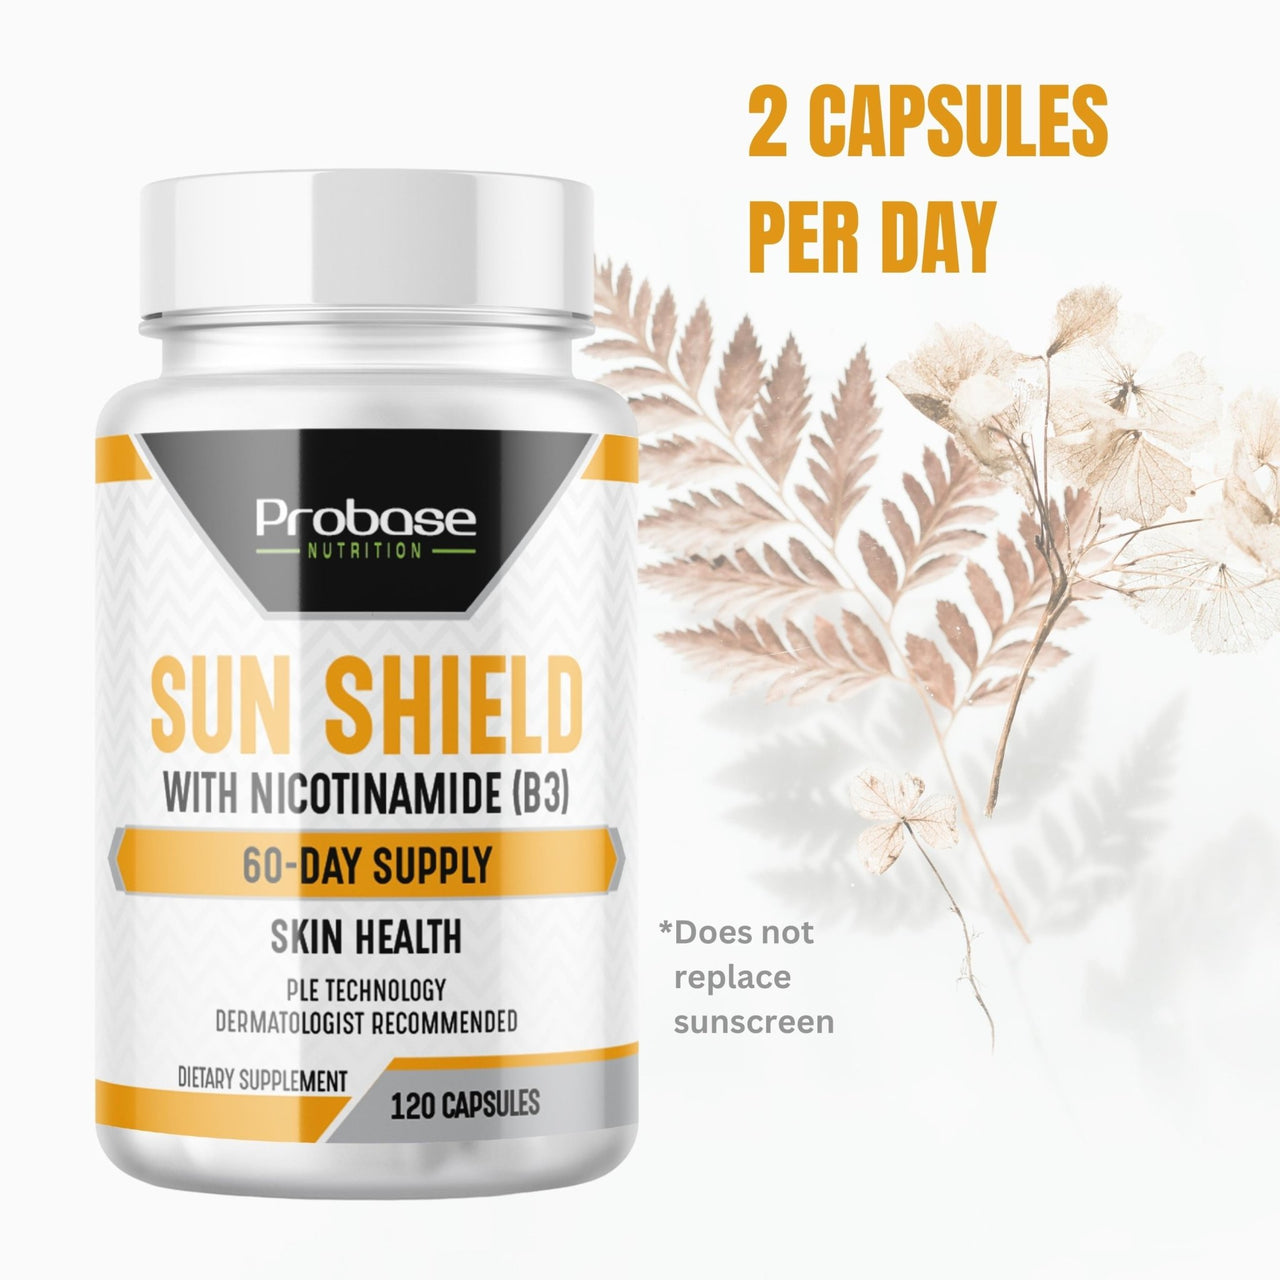 Probase Advanced Niacinamide B3 Supplement - Niacinamide 500mg and PLE Extract 240mg Per Serving - Supports Skin Cell Health and Antioxidant-Rich Vitamin B3 Niacin - 120 Capsules - Probase Nutrition